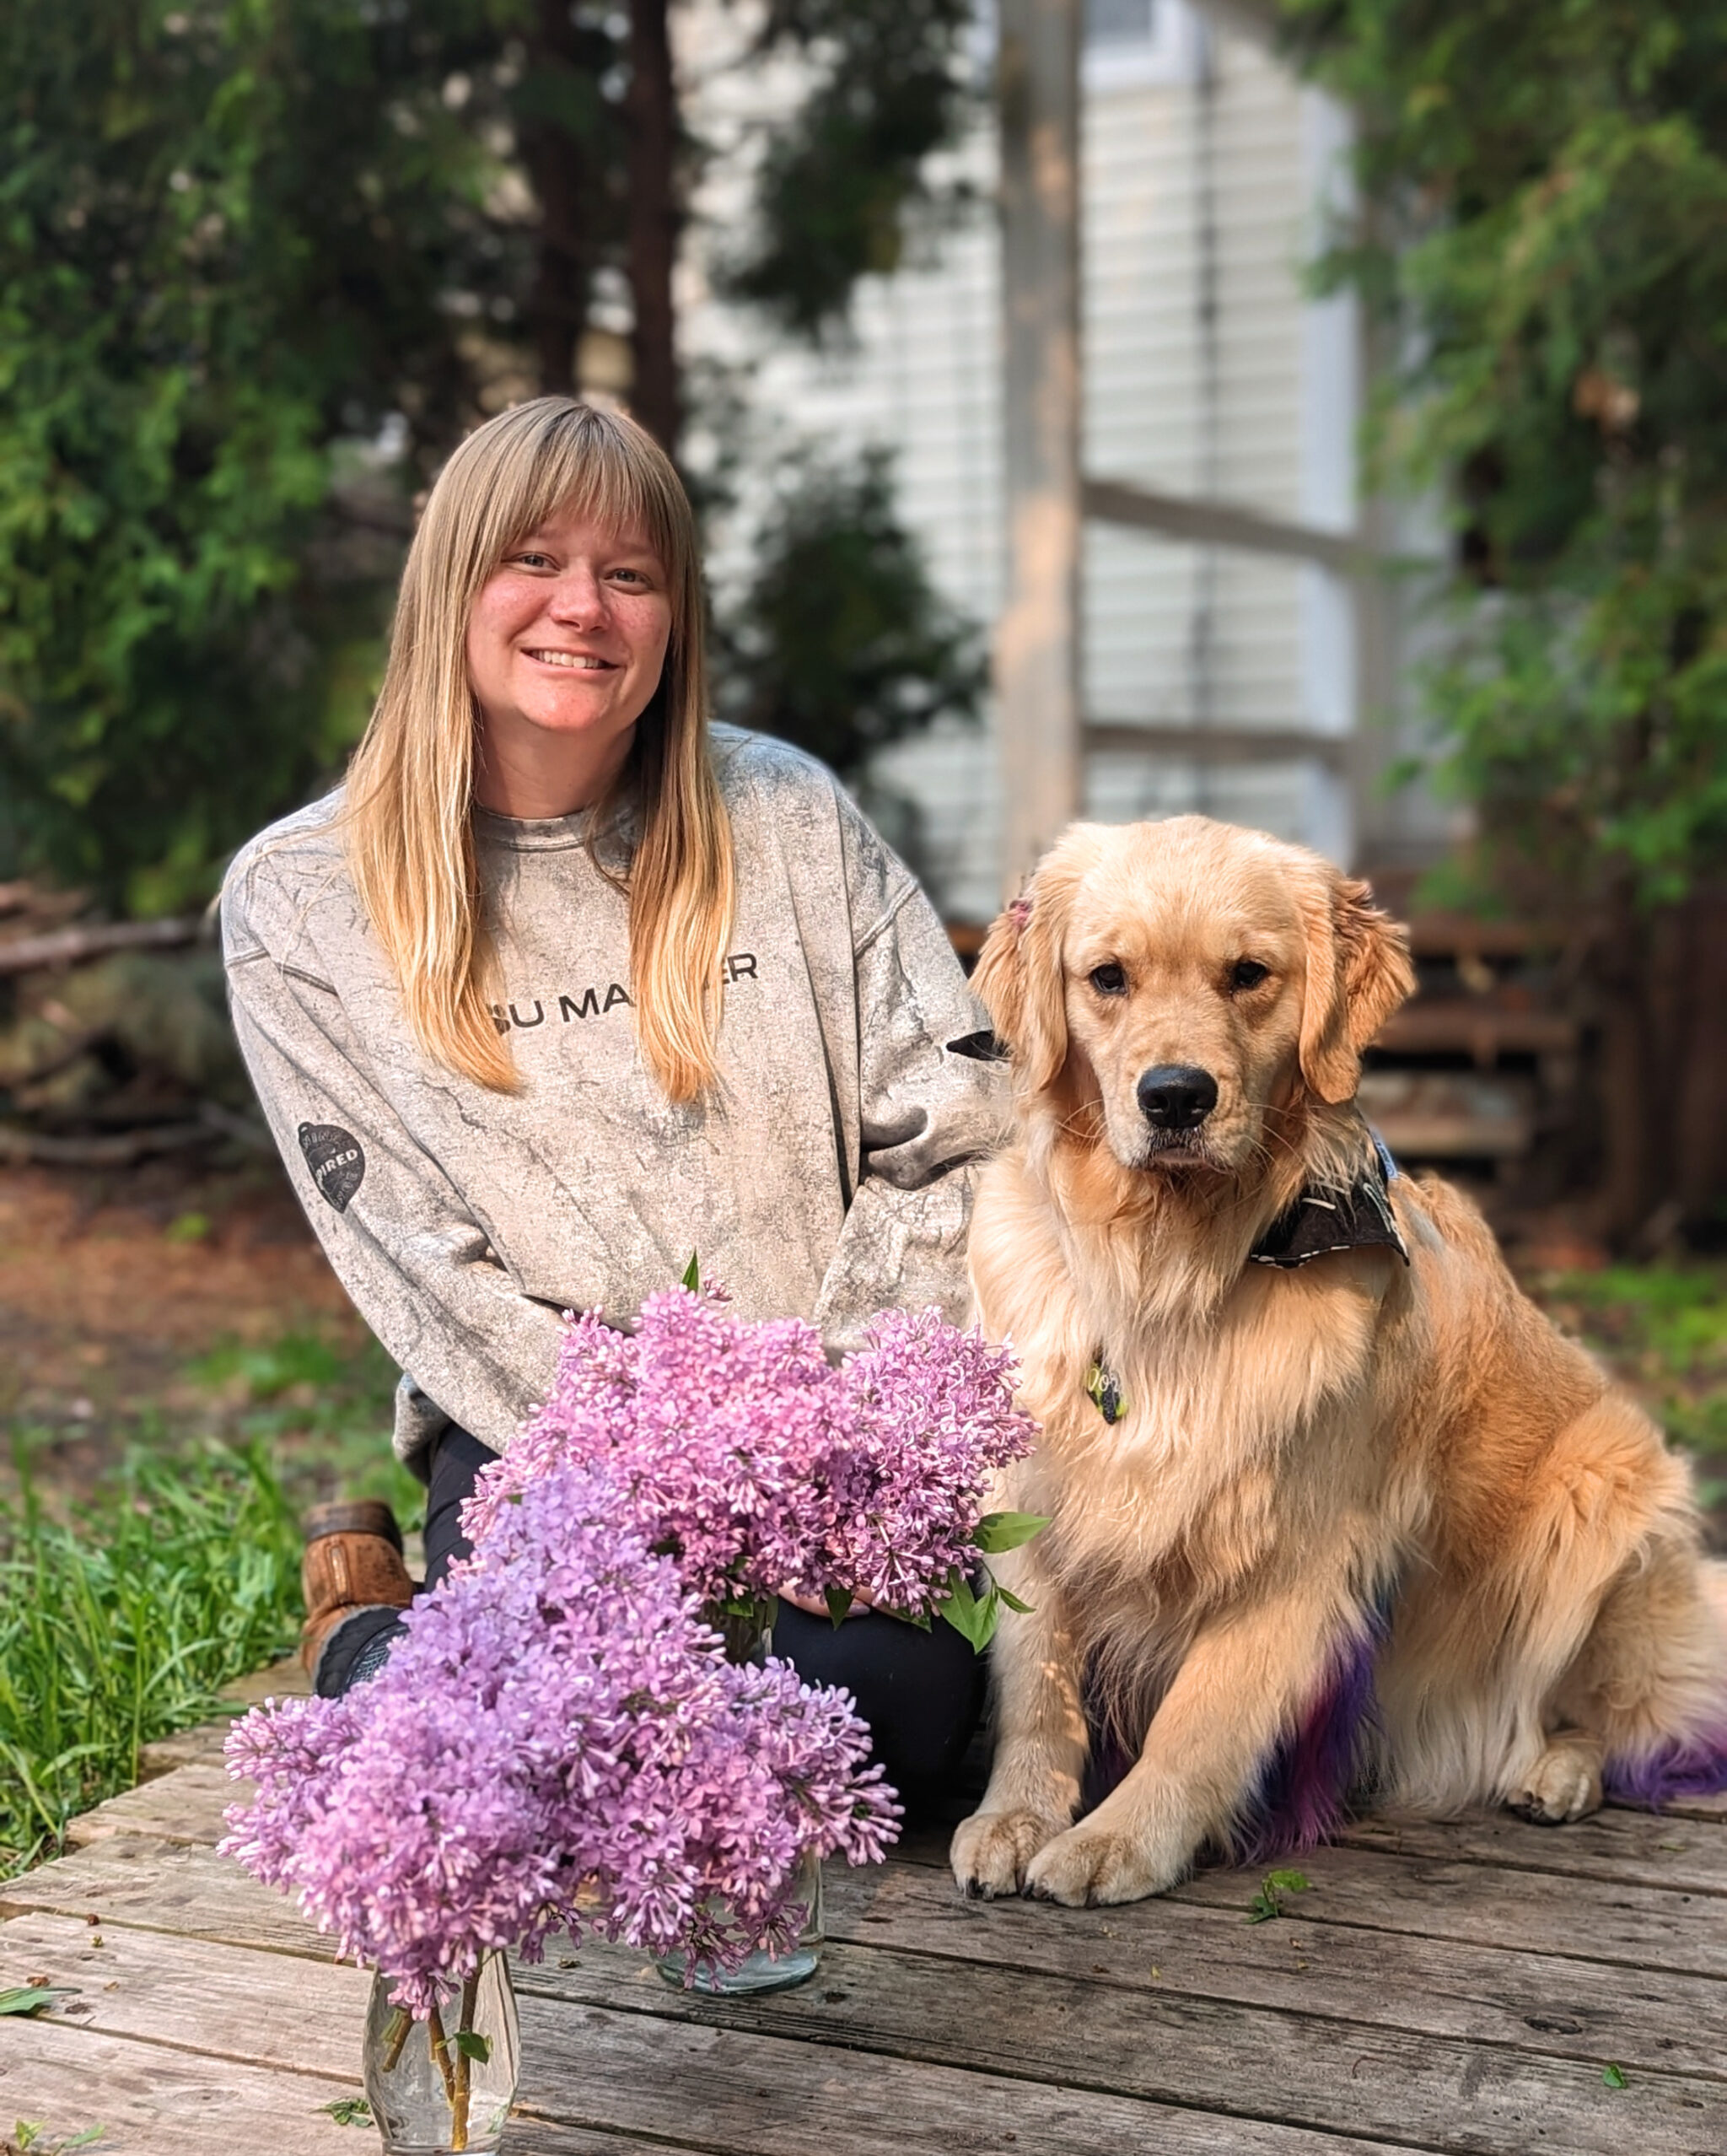 Metro Dogs trainer, Taylor with her Golden Retriever Dory and fresh cut lilacs.